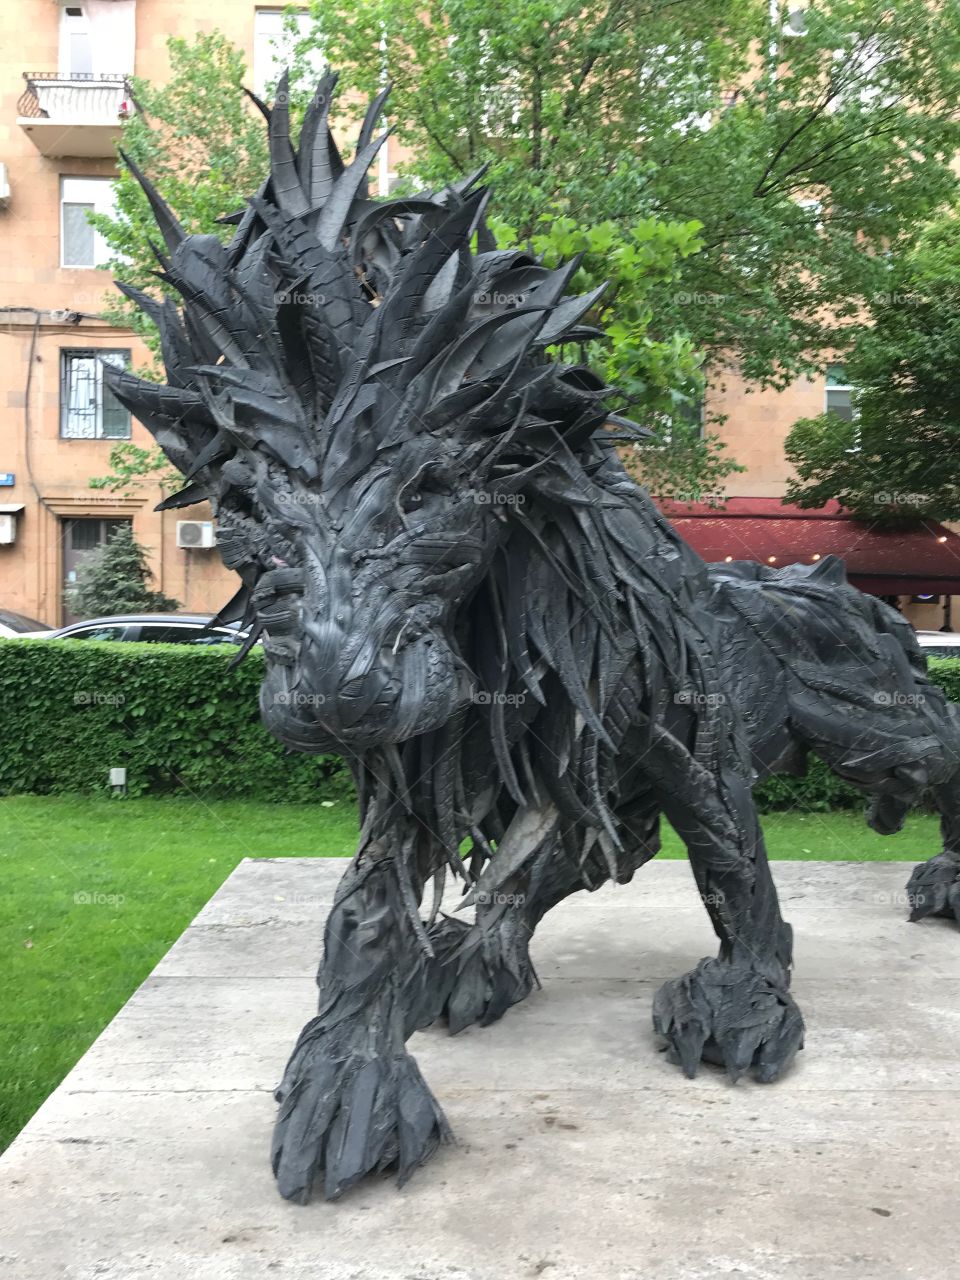 Lion sculpture made of tires